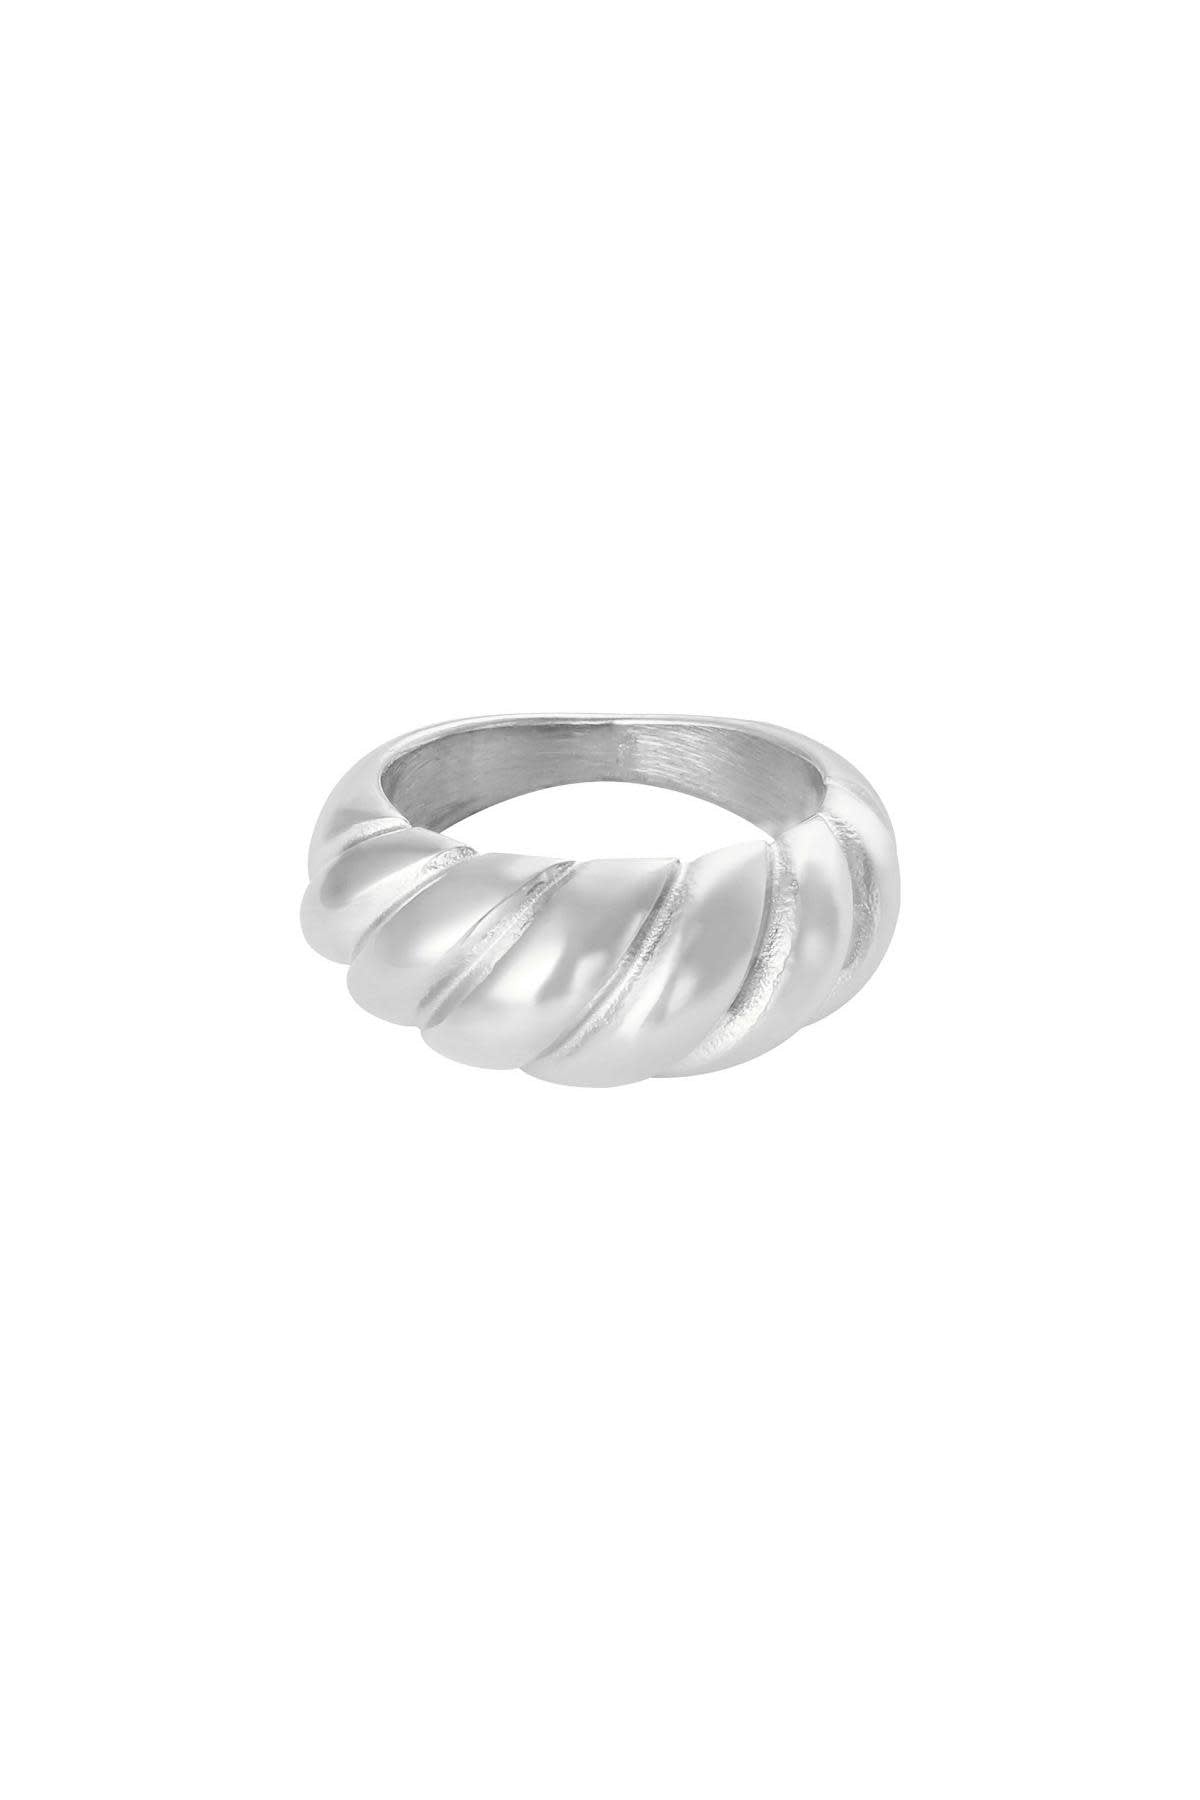 Stainless steel croissant ring size 17